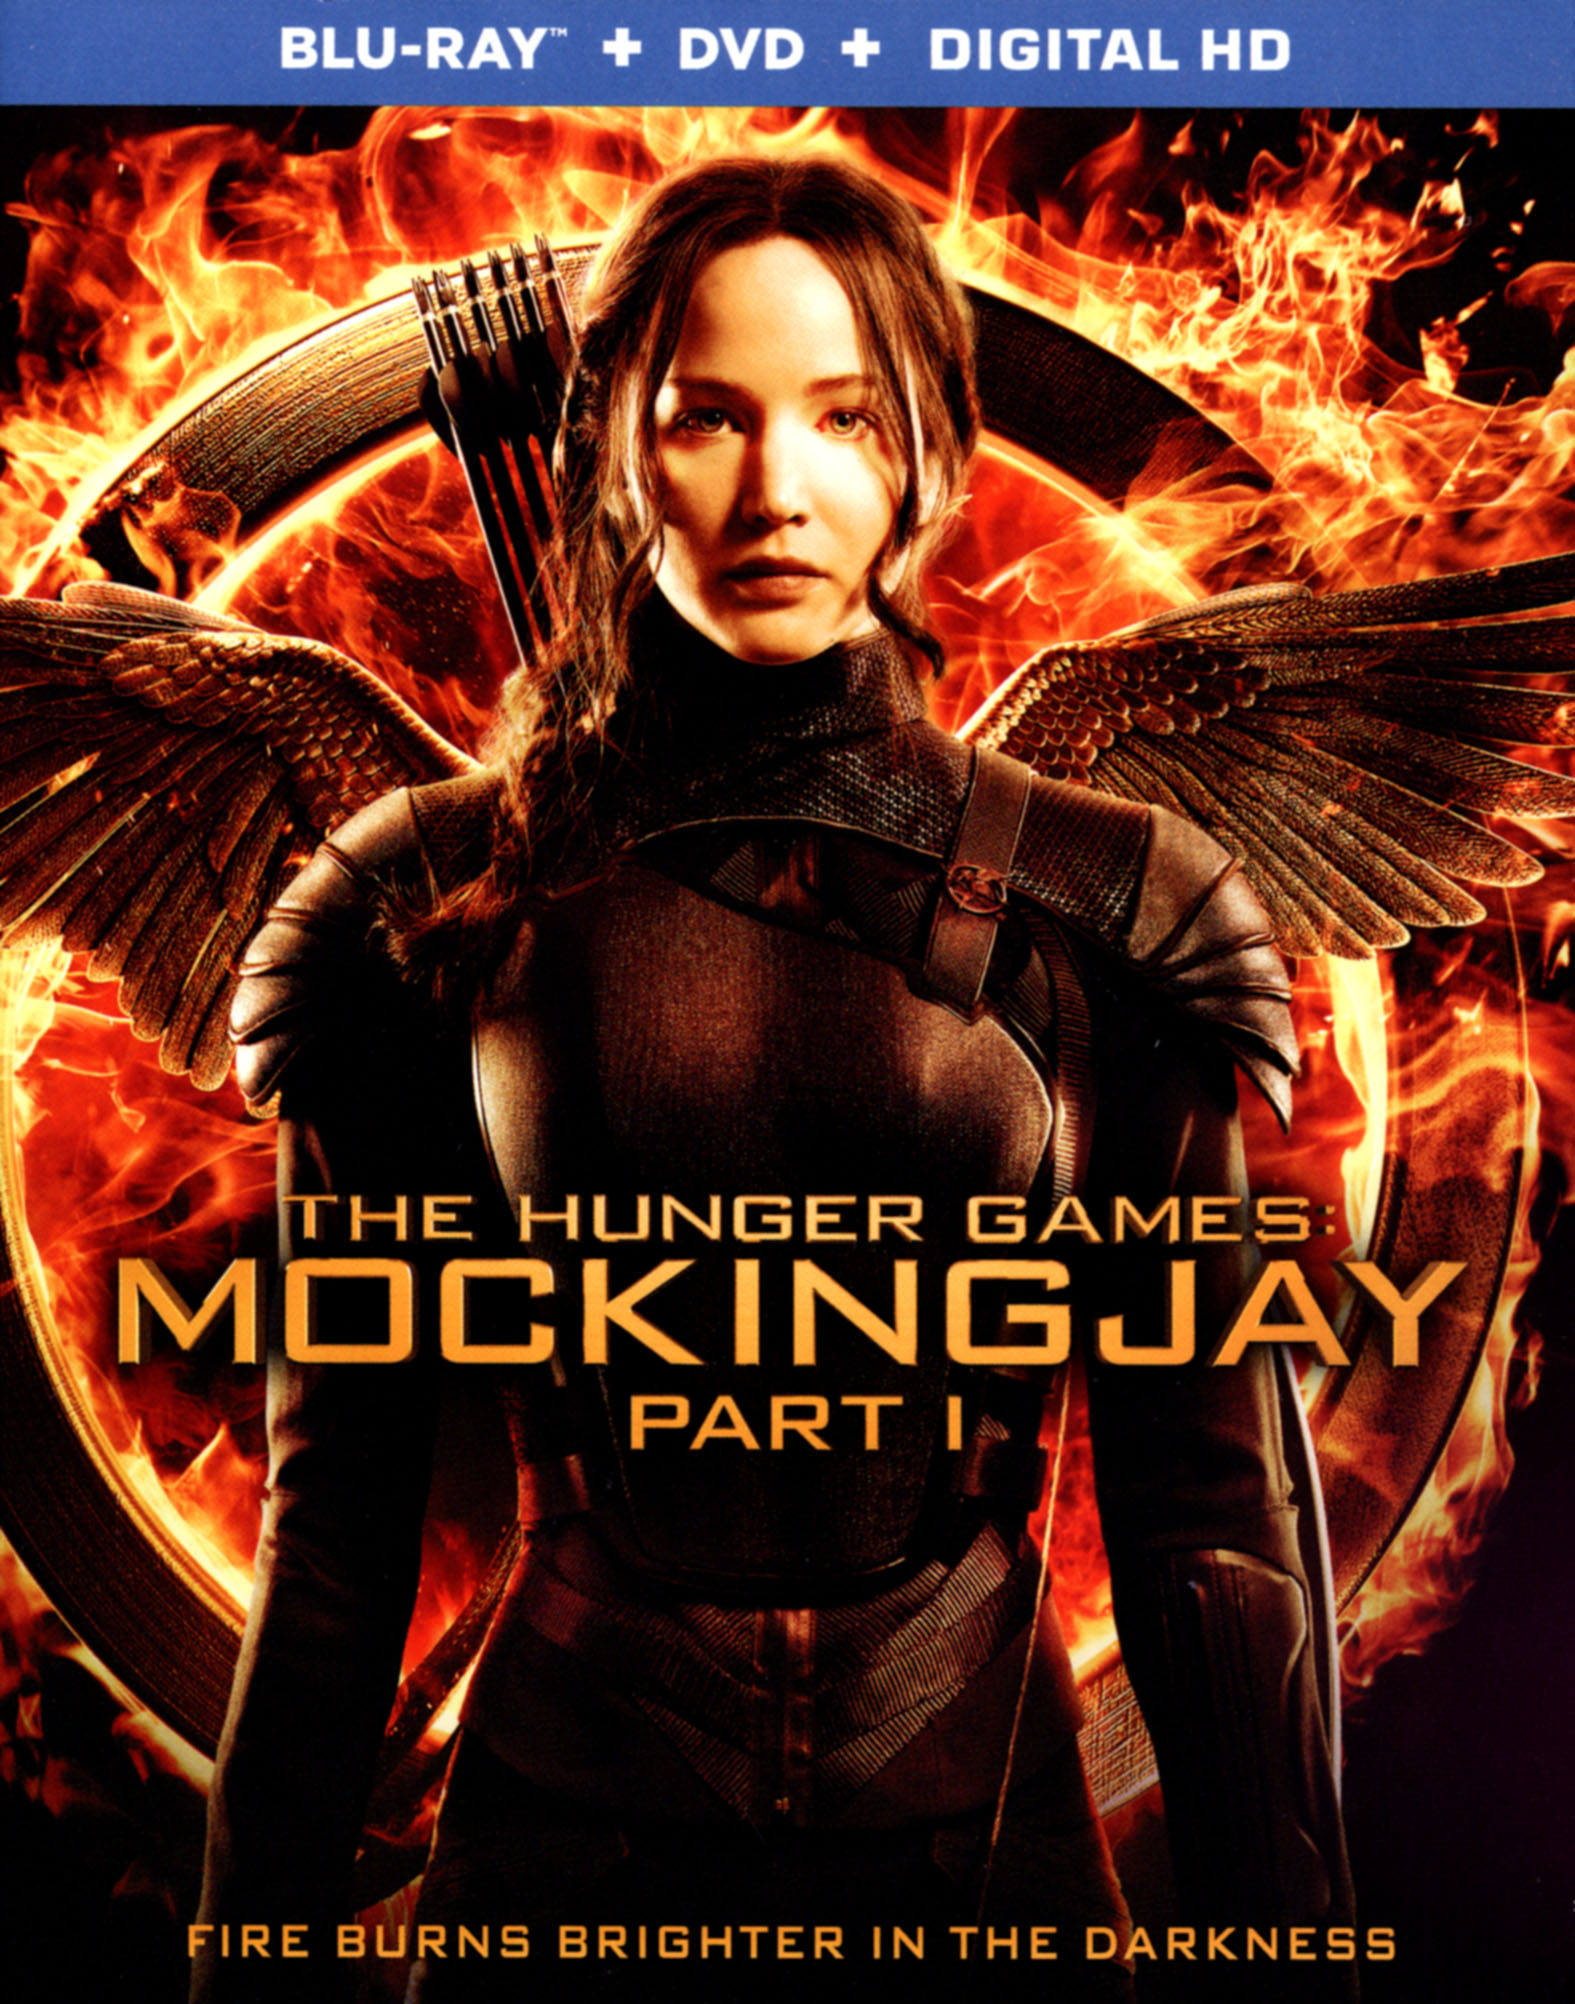 THE HUNGER GAMES: all 4 MOVIES (4K ULTRA HD) - Blu Ray - Region